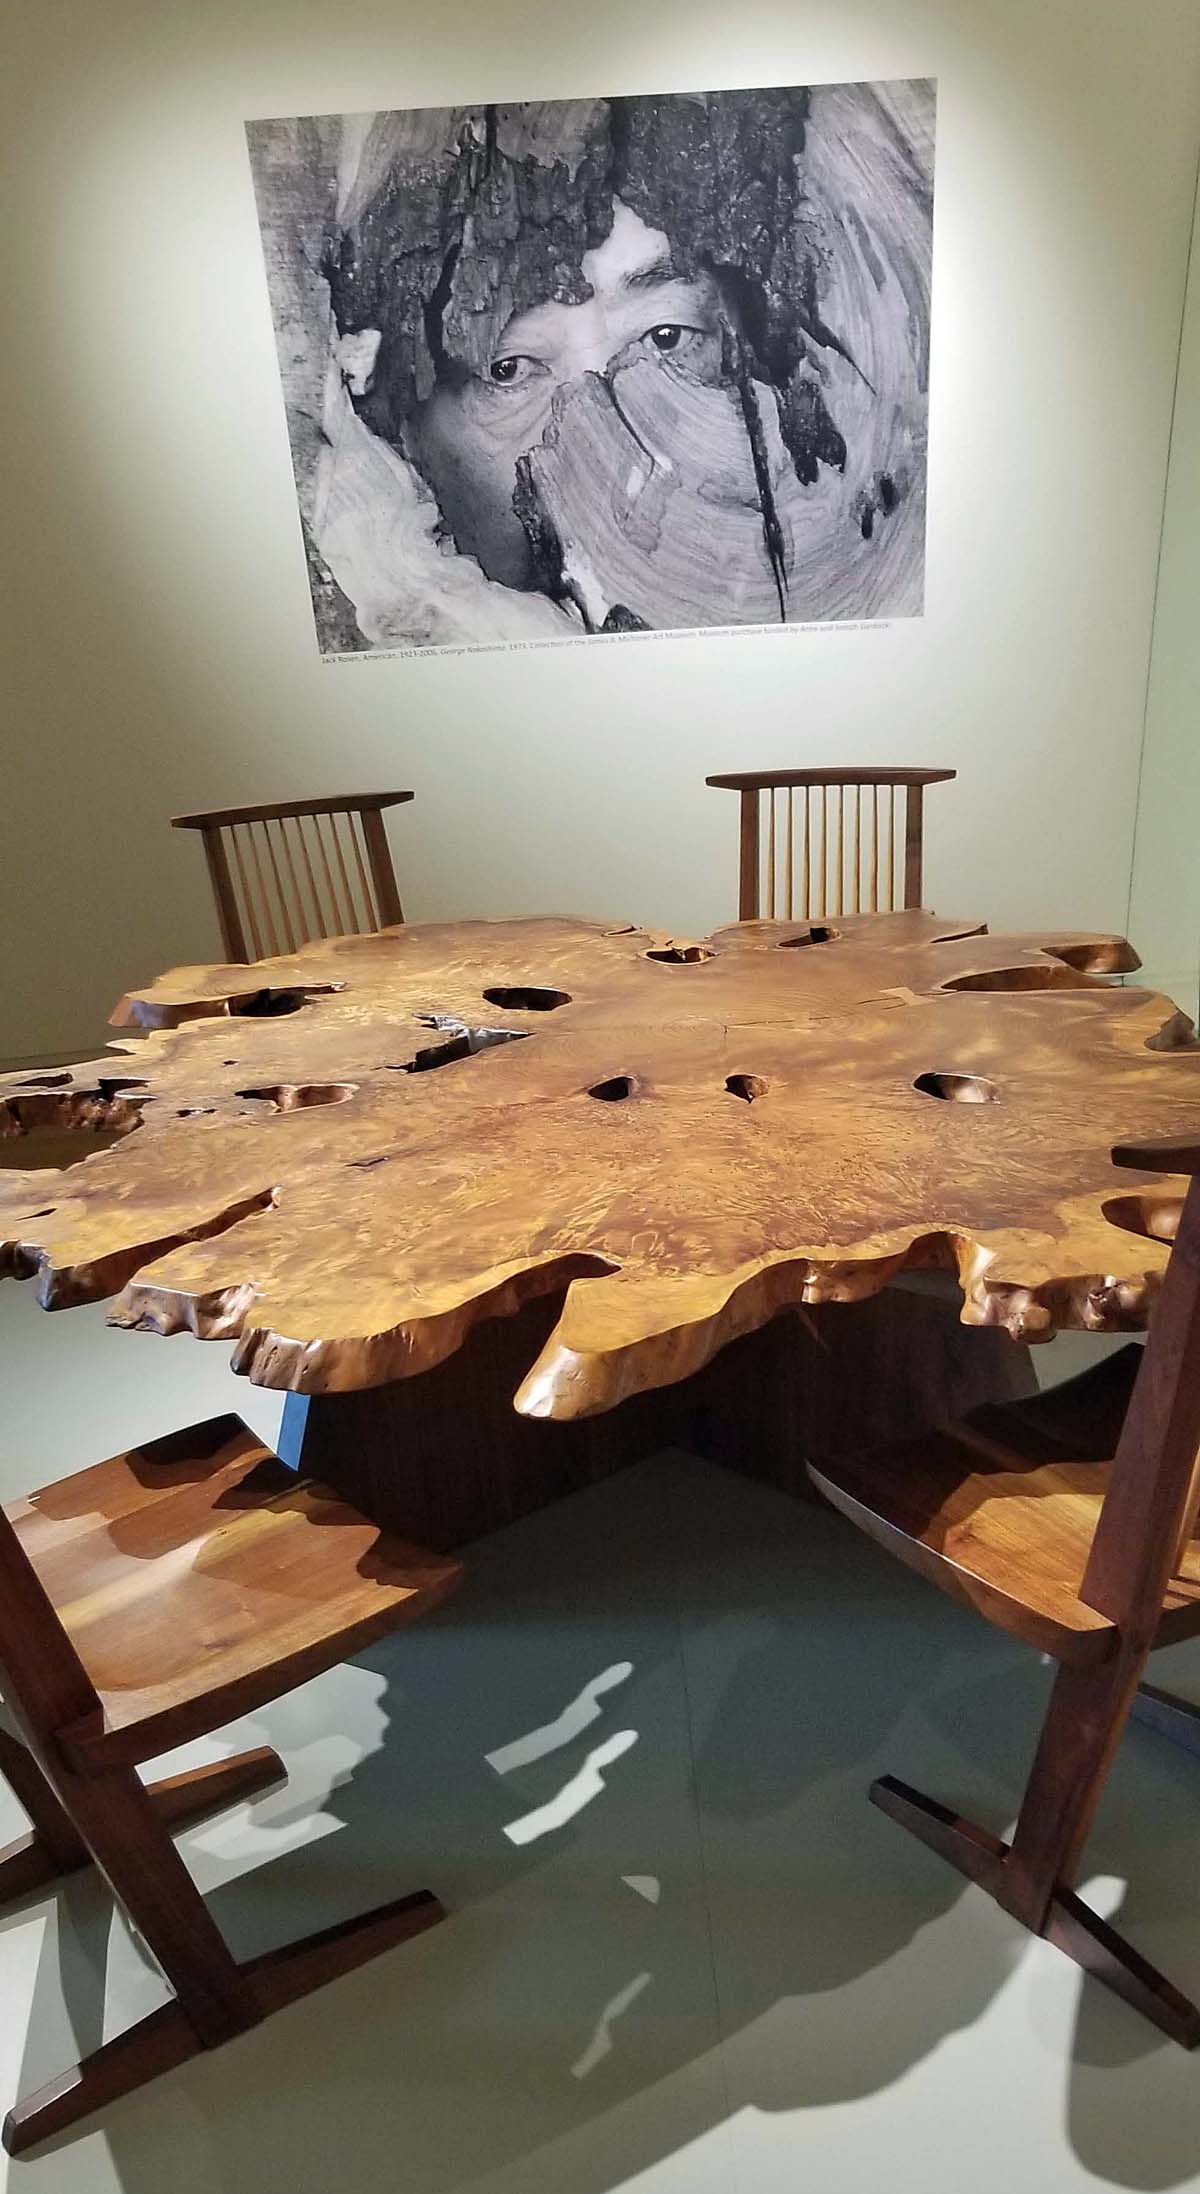 museums maacm nakashima 1200 3 new collections boost St. Petersburg as 'City of Art'